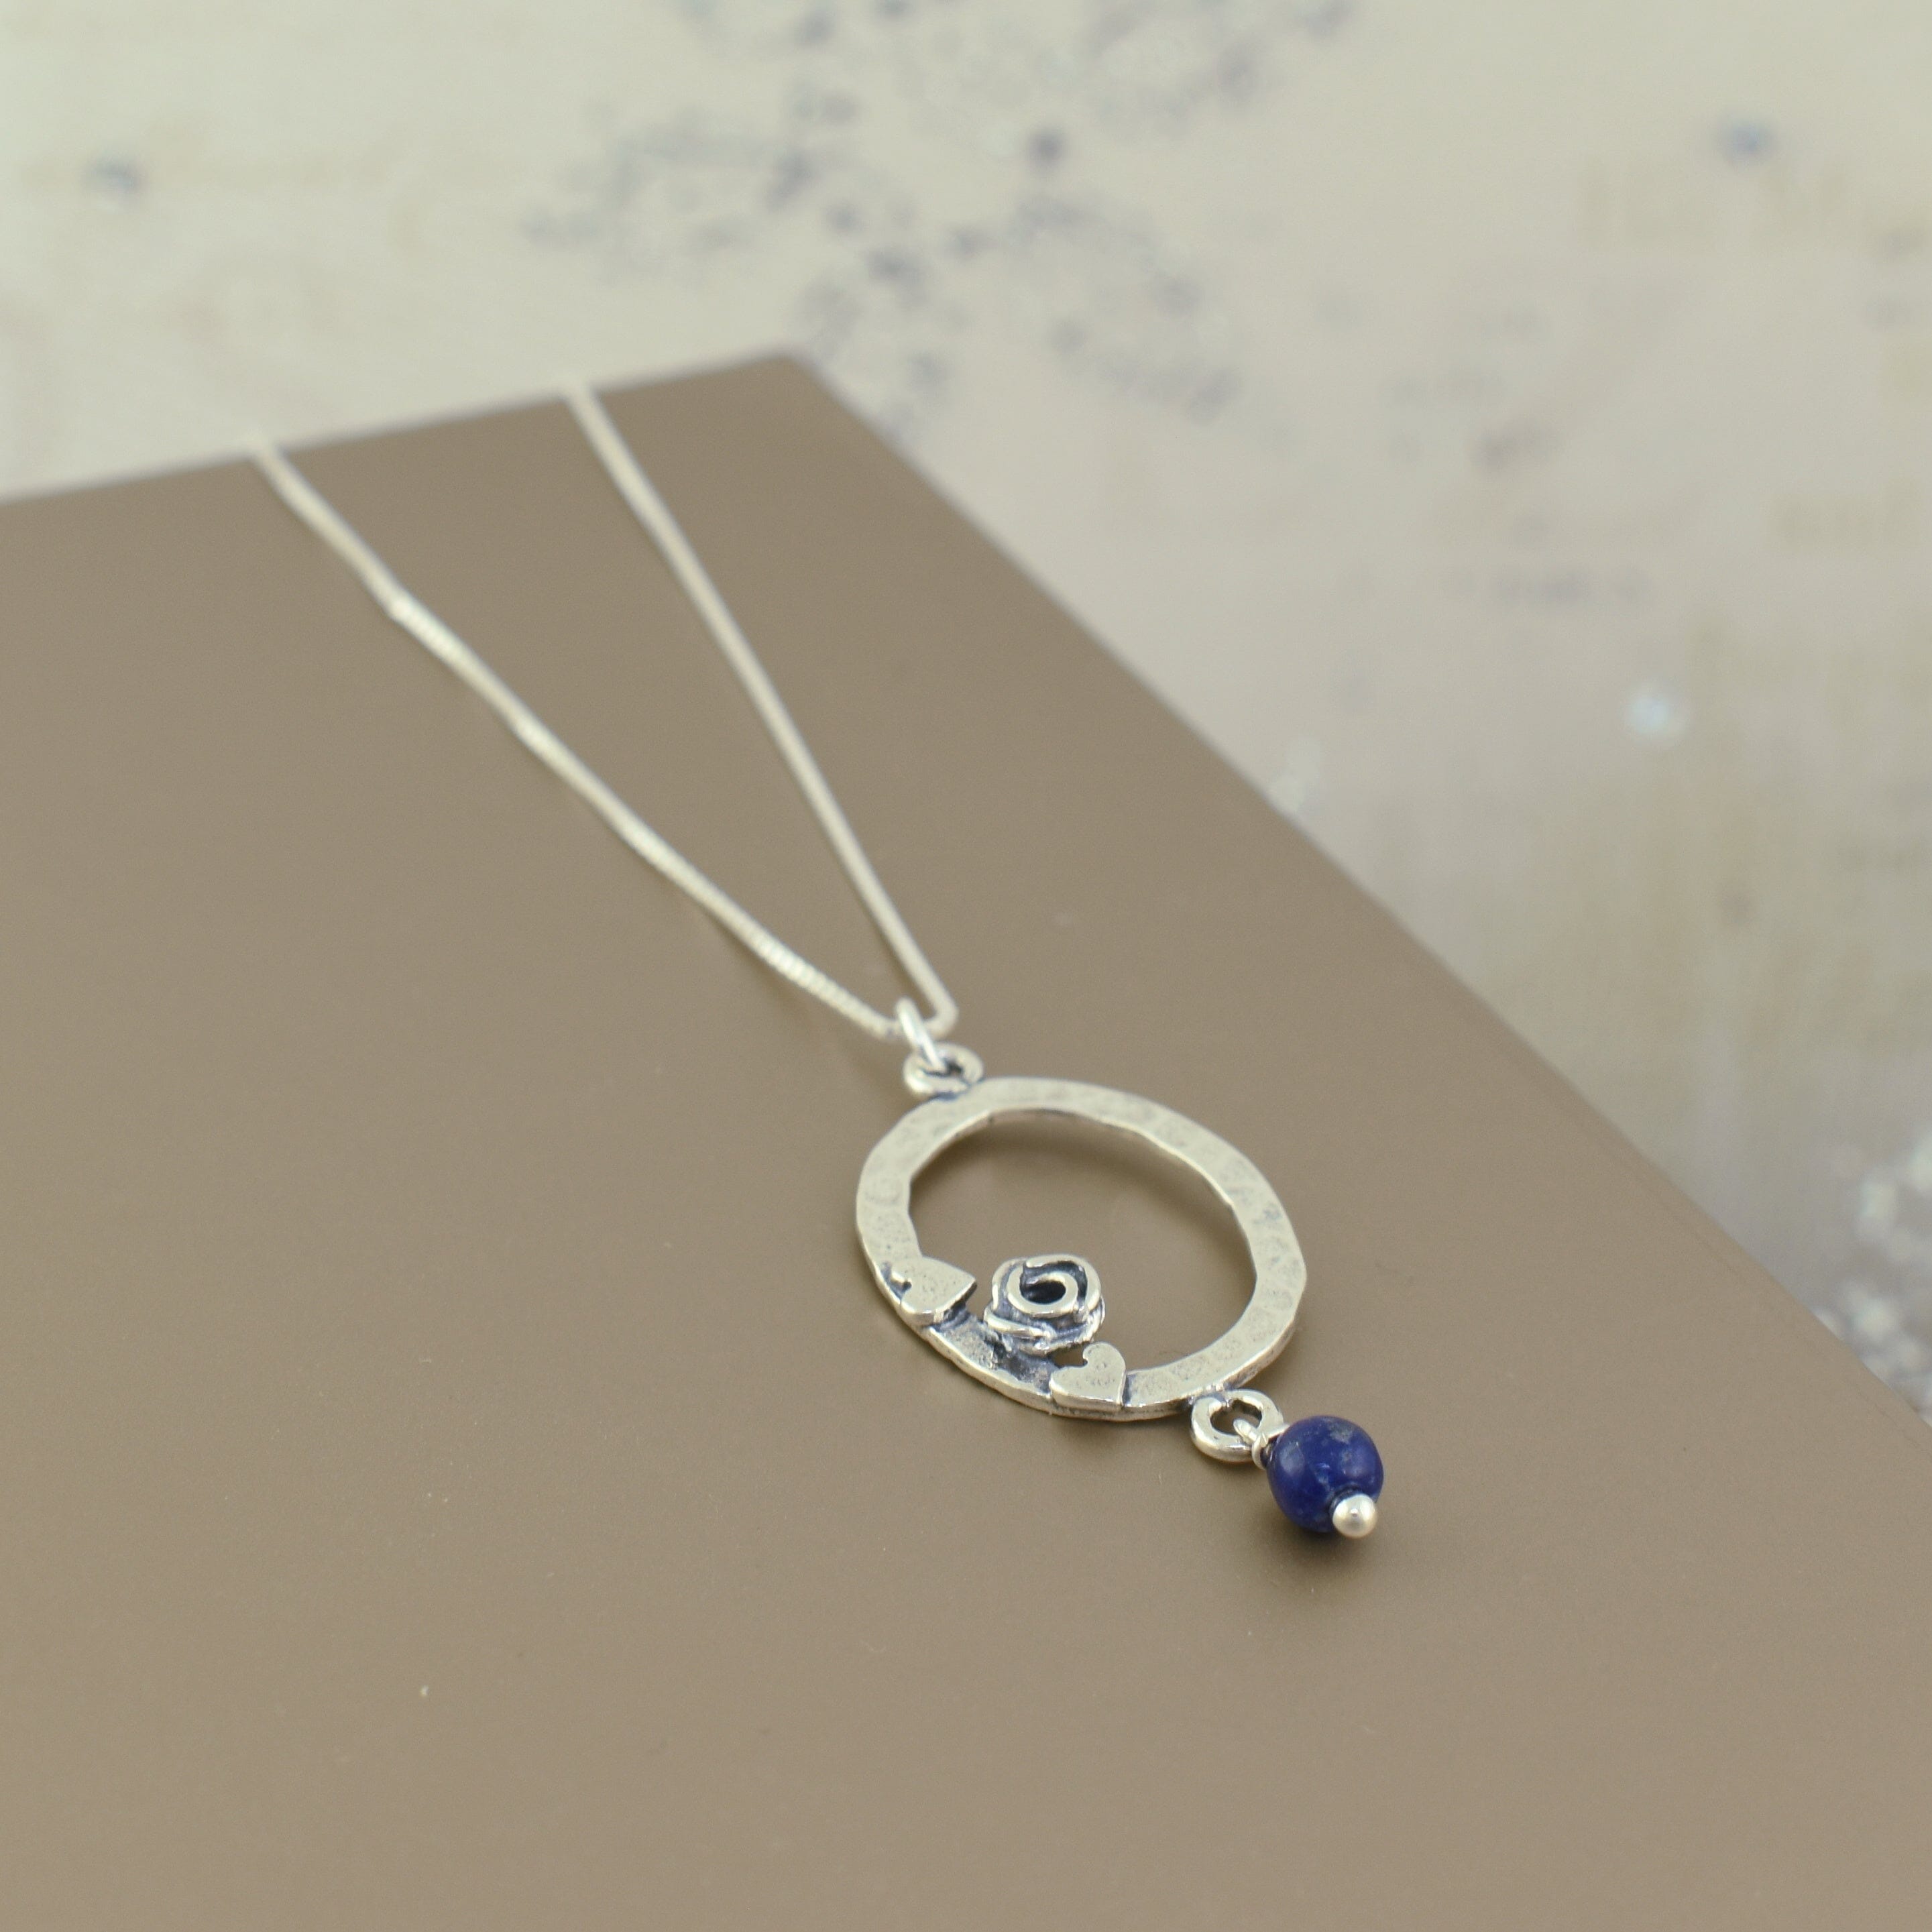 .925 sterling silver and lapis necklace with rose and heart accents